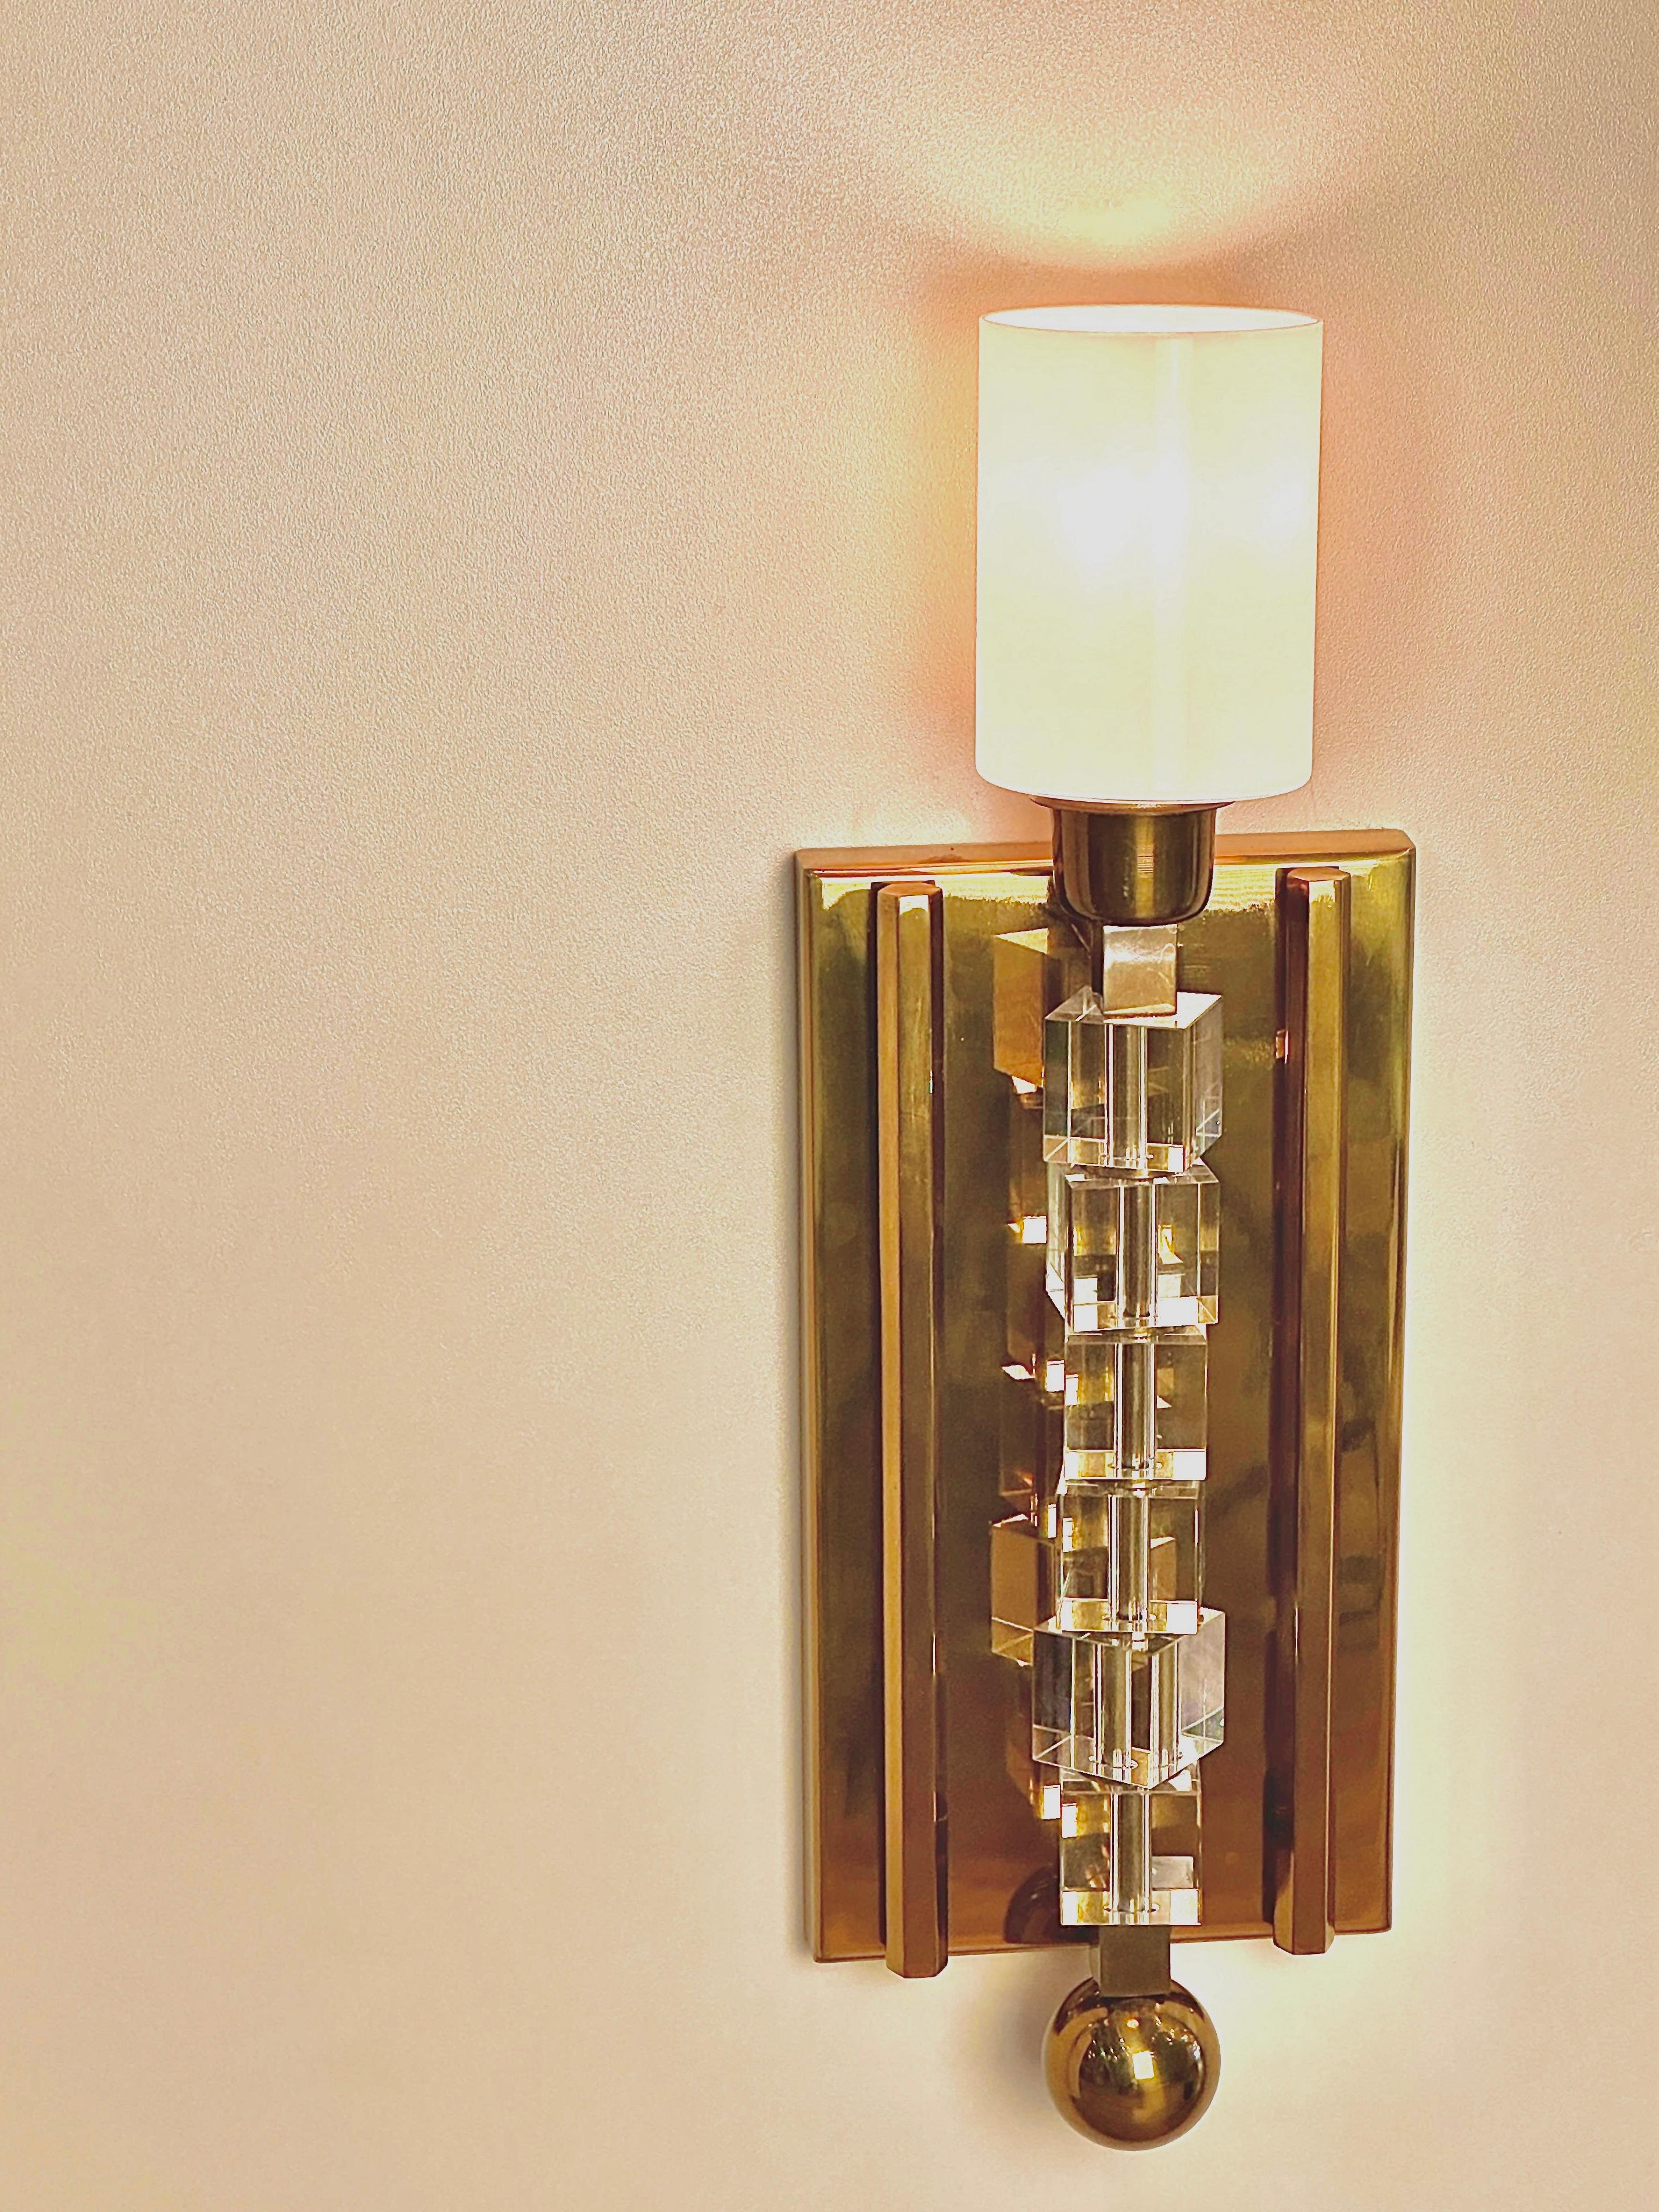 TORTONA Brass Casting Wall Sconce, a radiant luminary that goes beyond mere lighting, serving as an artful centerpiece in your interior design. This wall sconce is a harmonious marriage of chic aesthetics and sophisticated illumination, bringing a